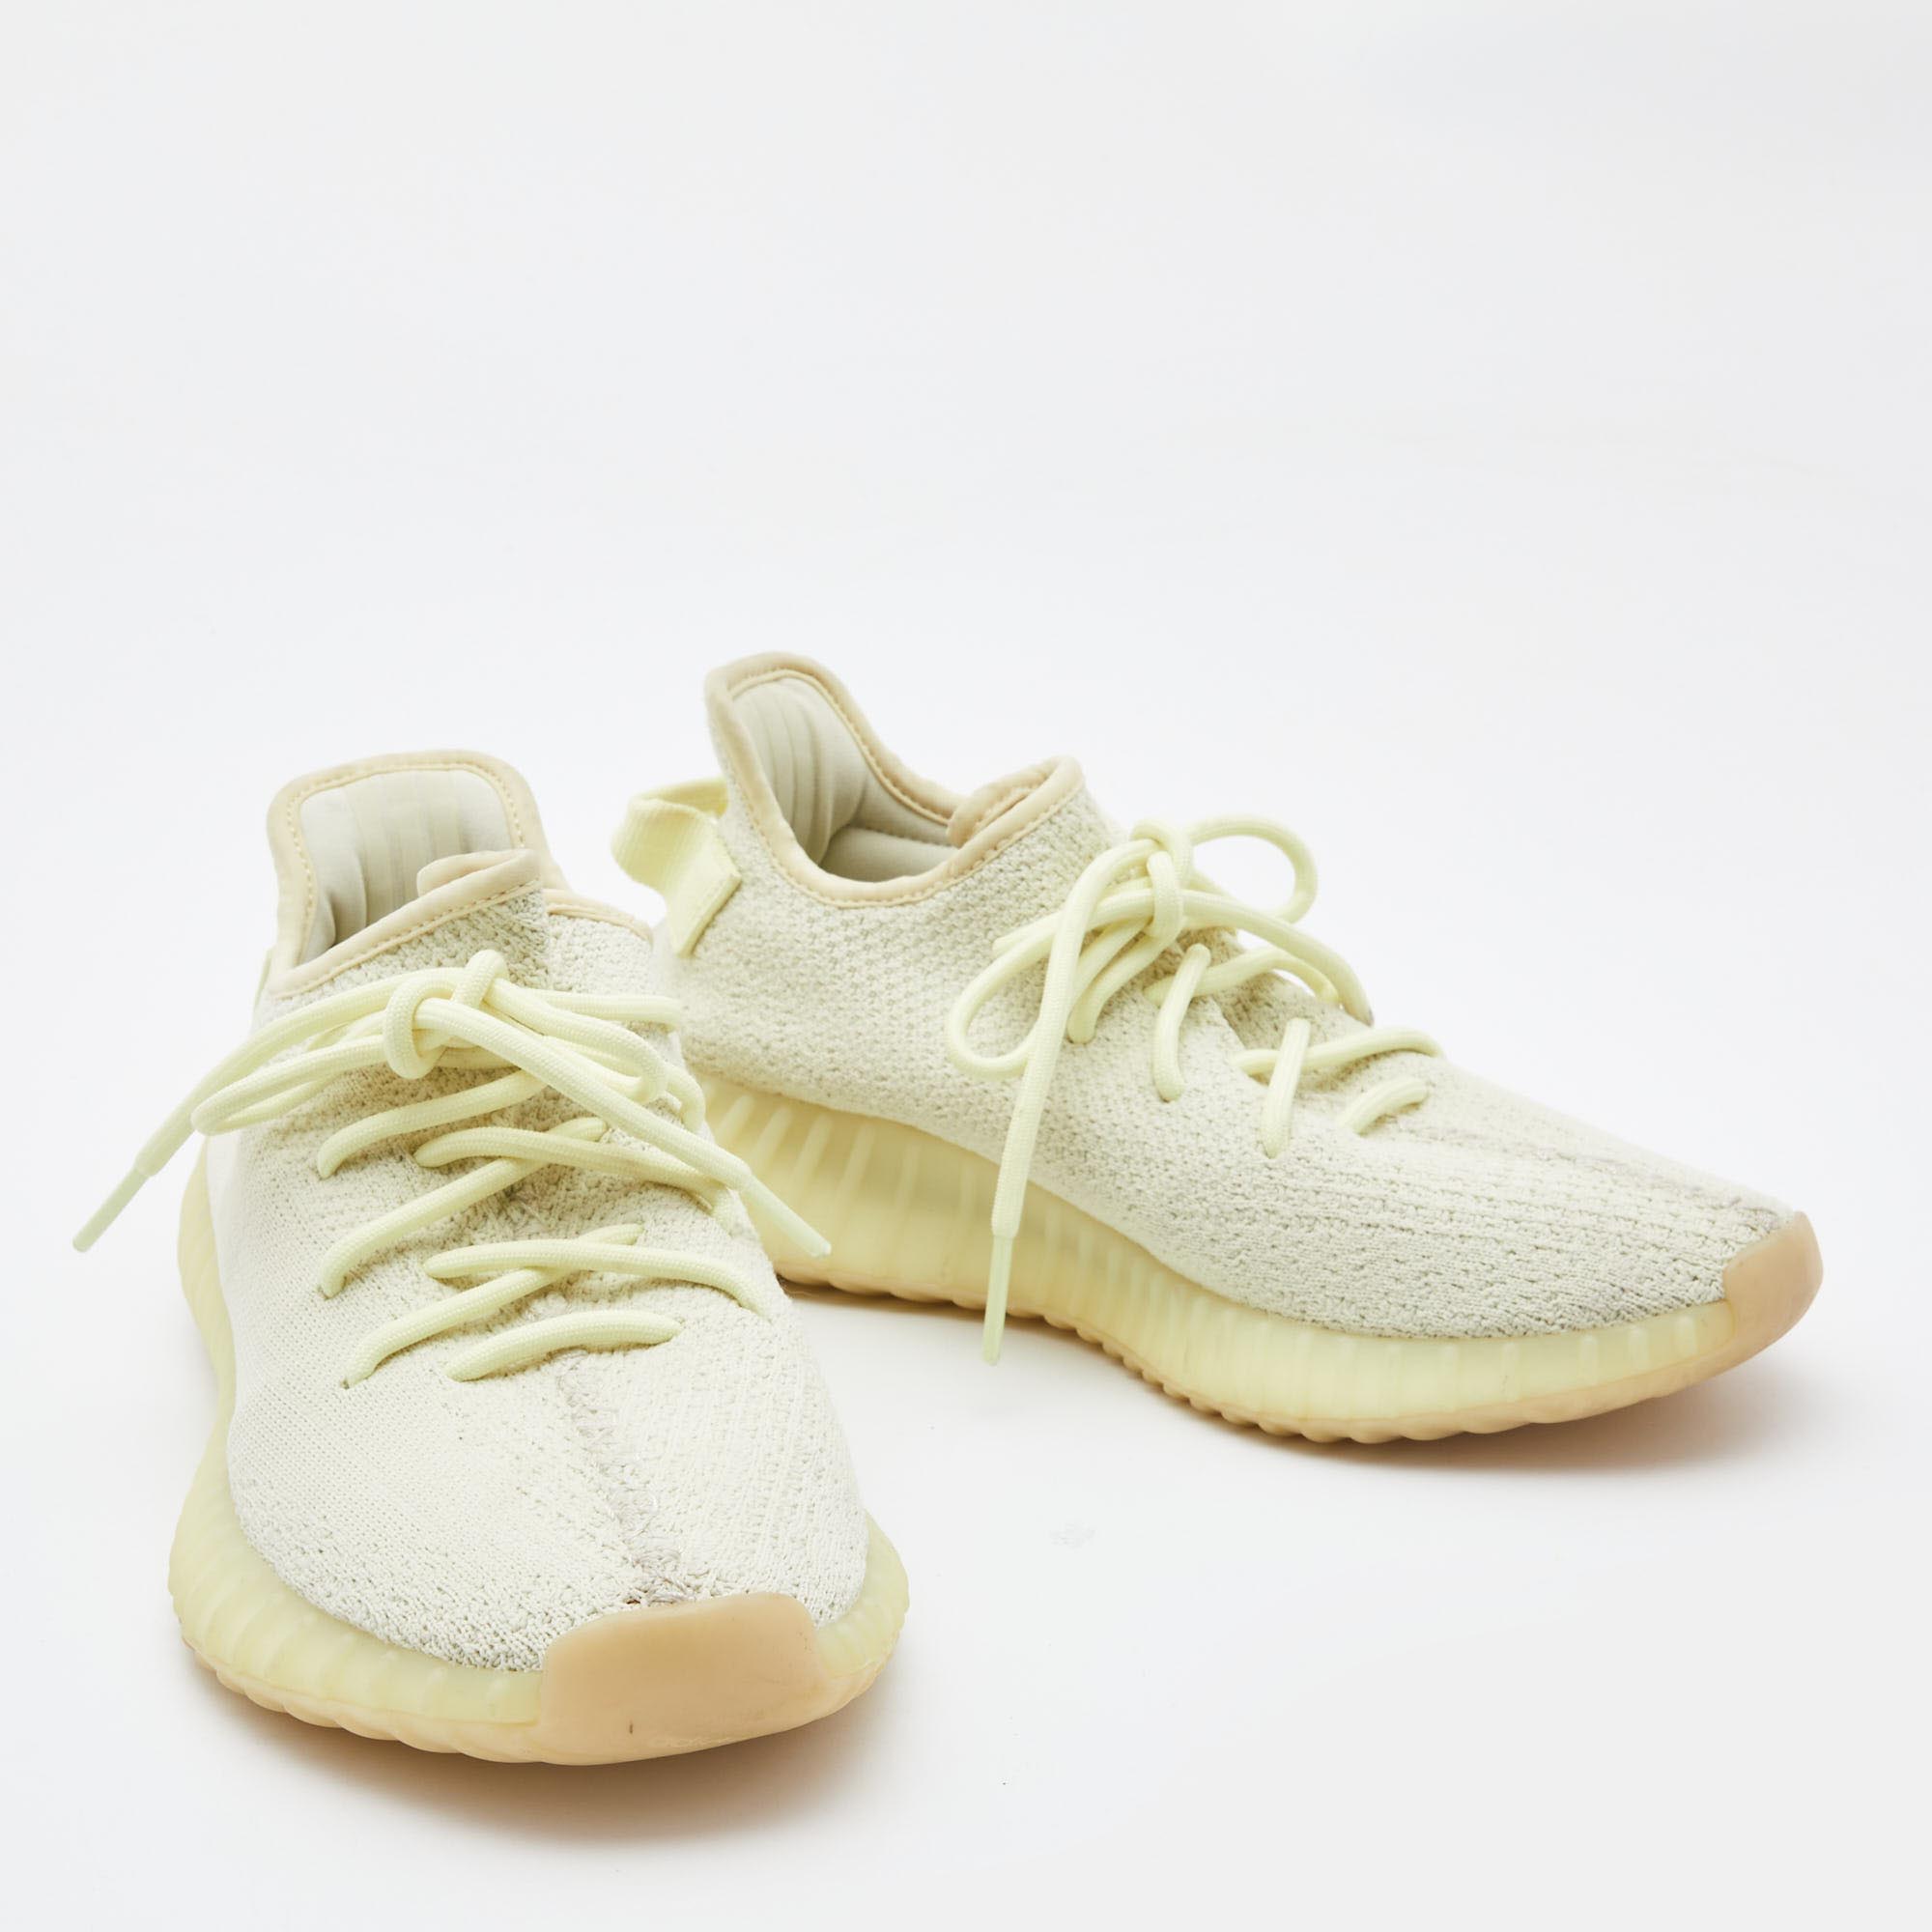 Yeezy X Adidas Light Yellow Knit Fabric Boost 350 V2 Butter Sneakers Size 41 1/3